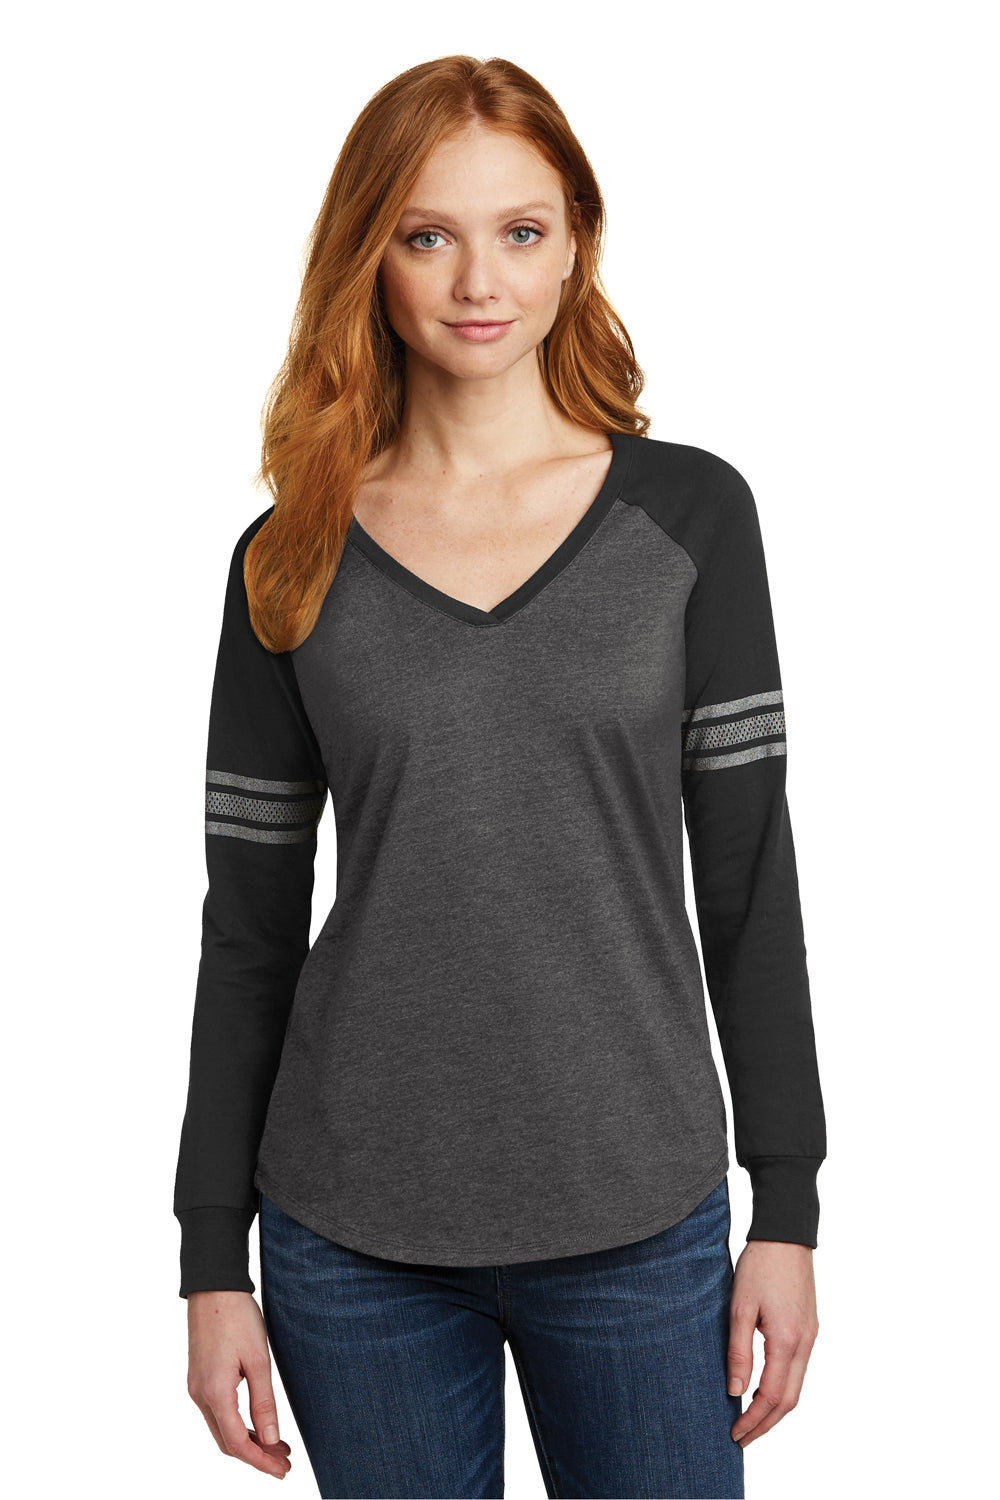 District DM477 Womens Game Long Sleeve V-Neck T-Shirt Heather Charcoal Grey/Black/Silver Grey Front